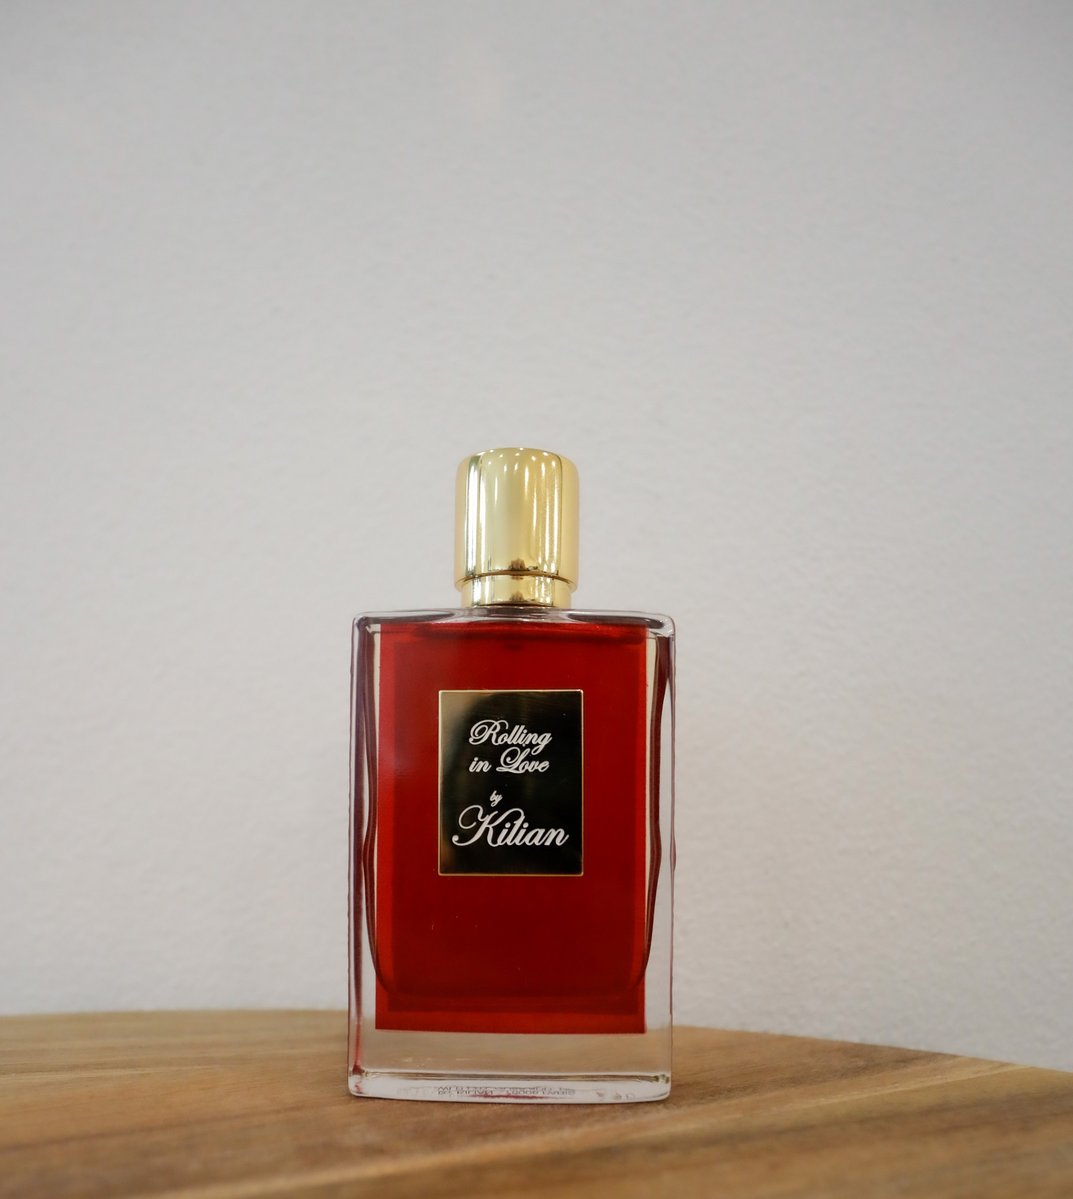 Kilian Rolling In Love is an Amber Floral fragrance for both men and women